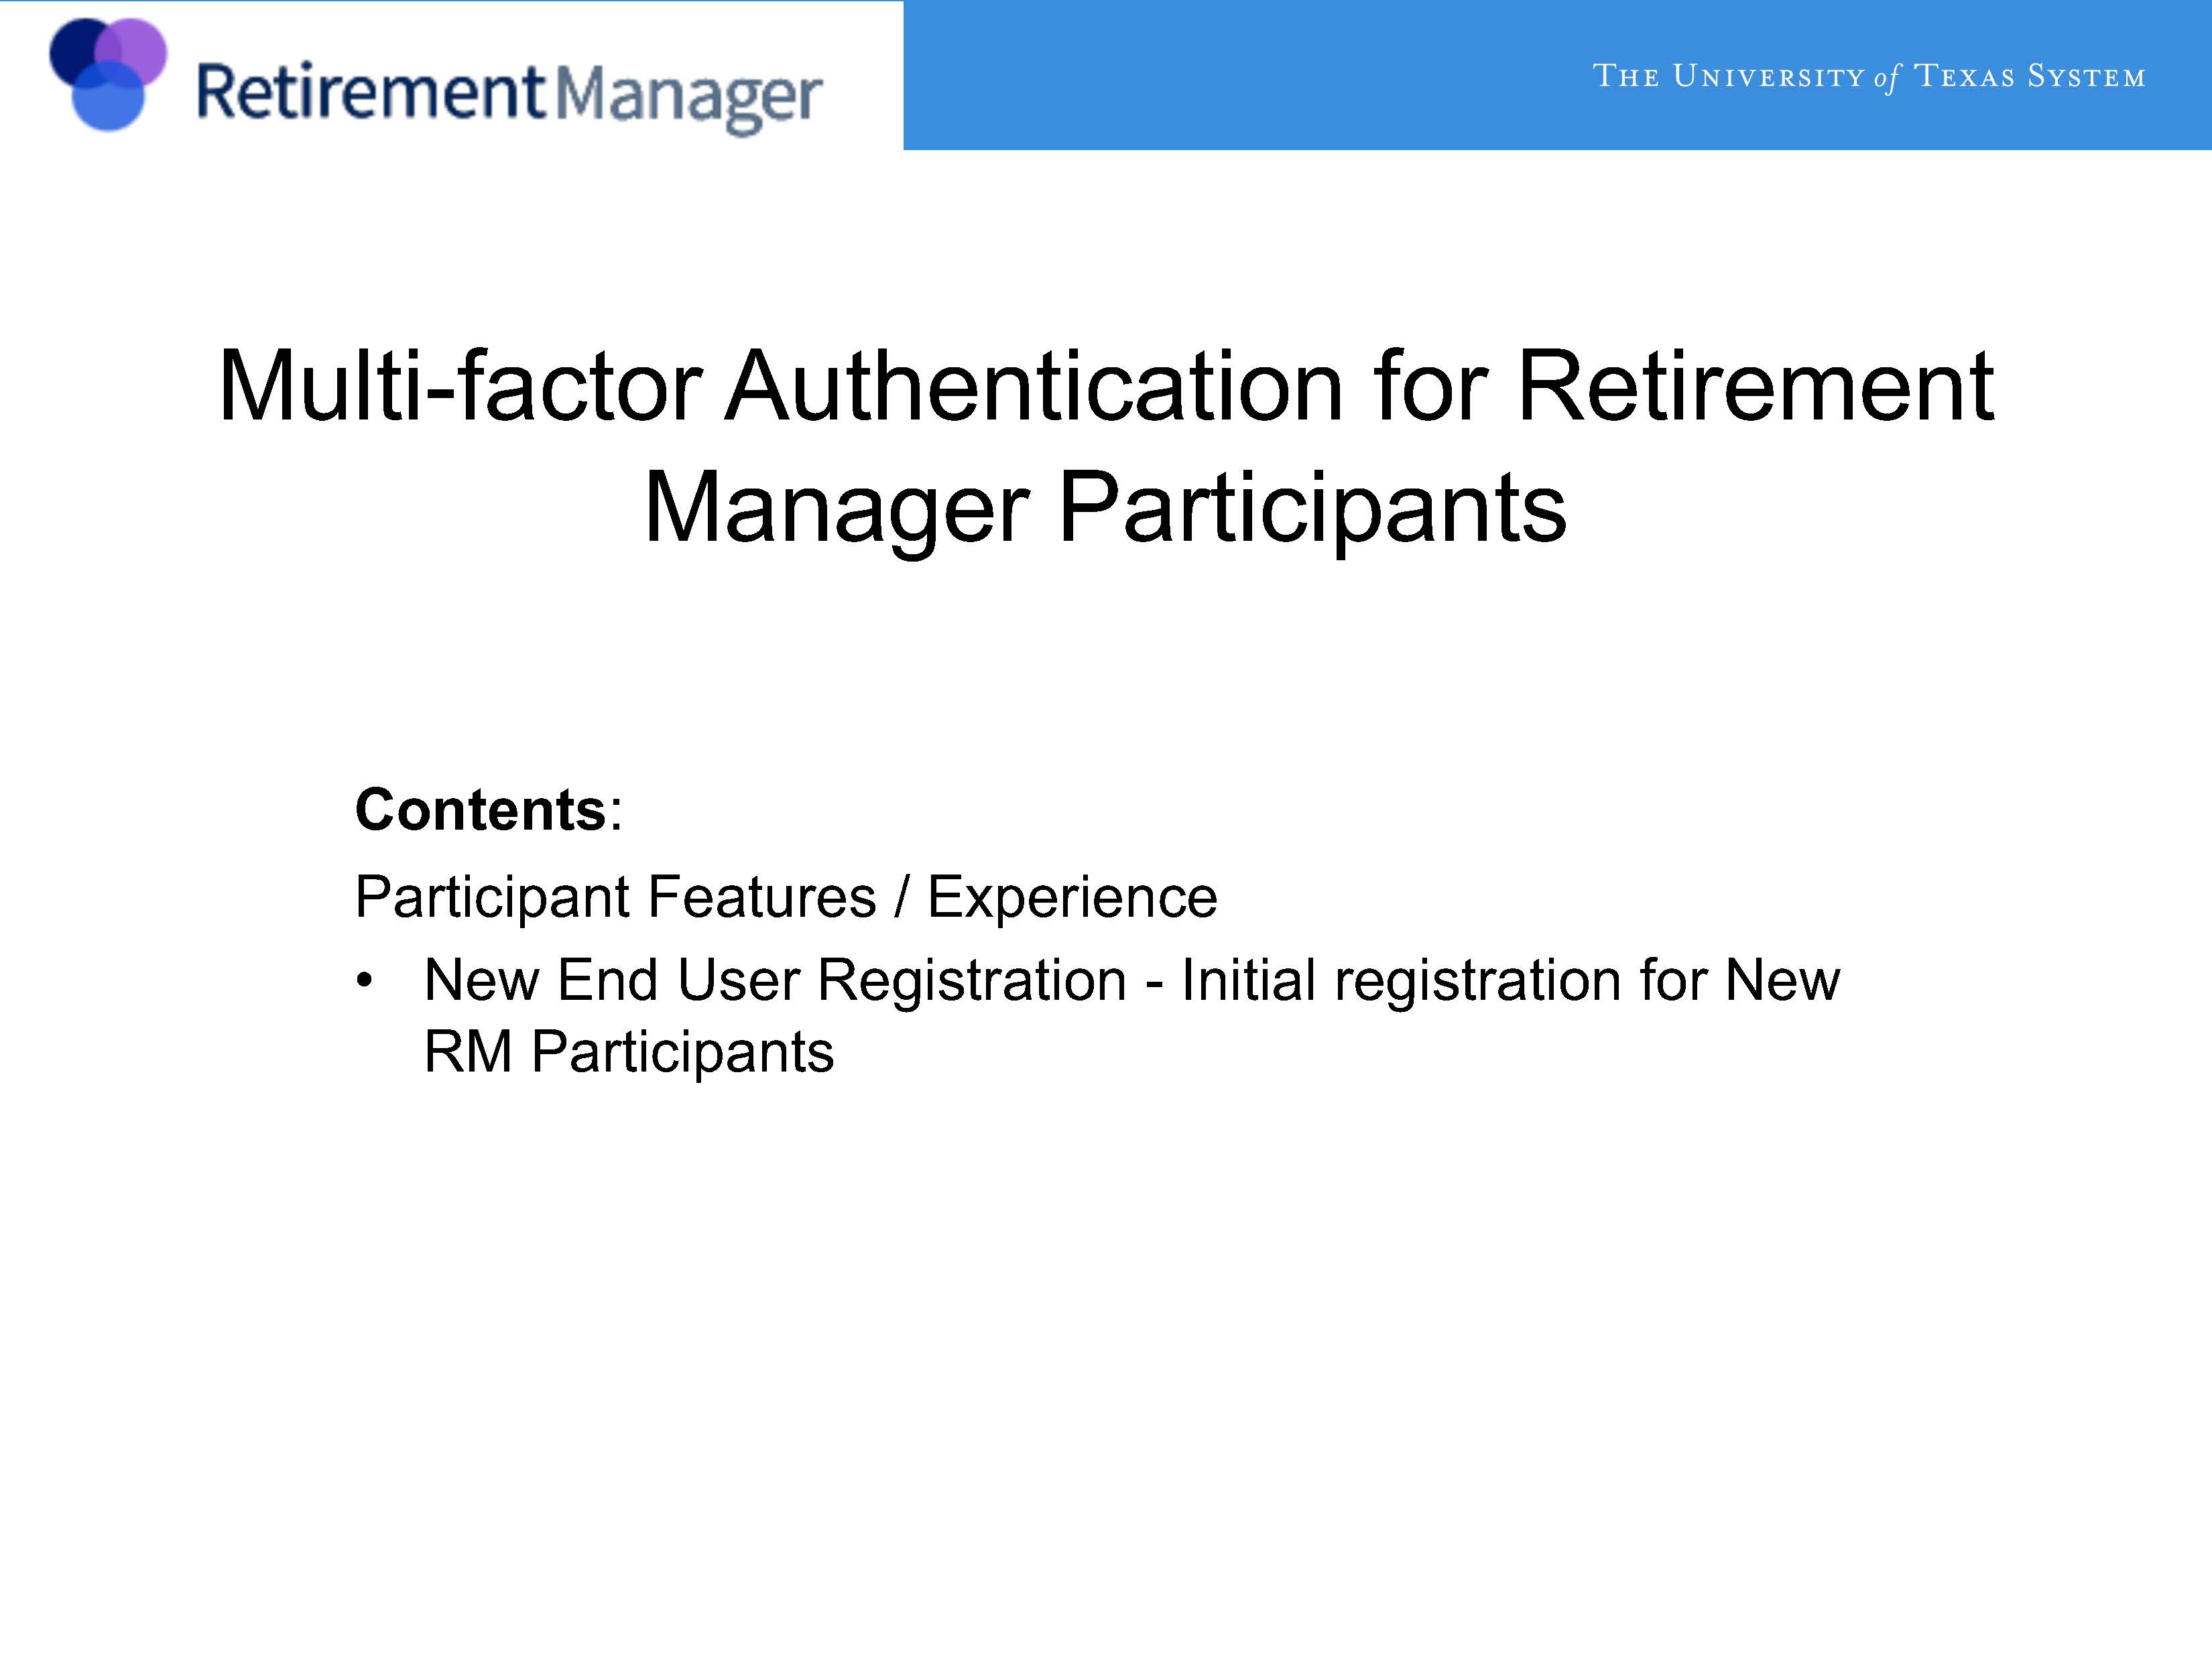 Logging Into Retirement Manager